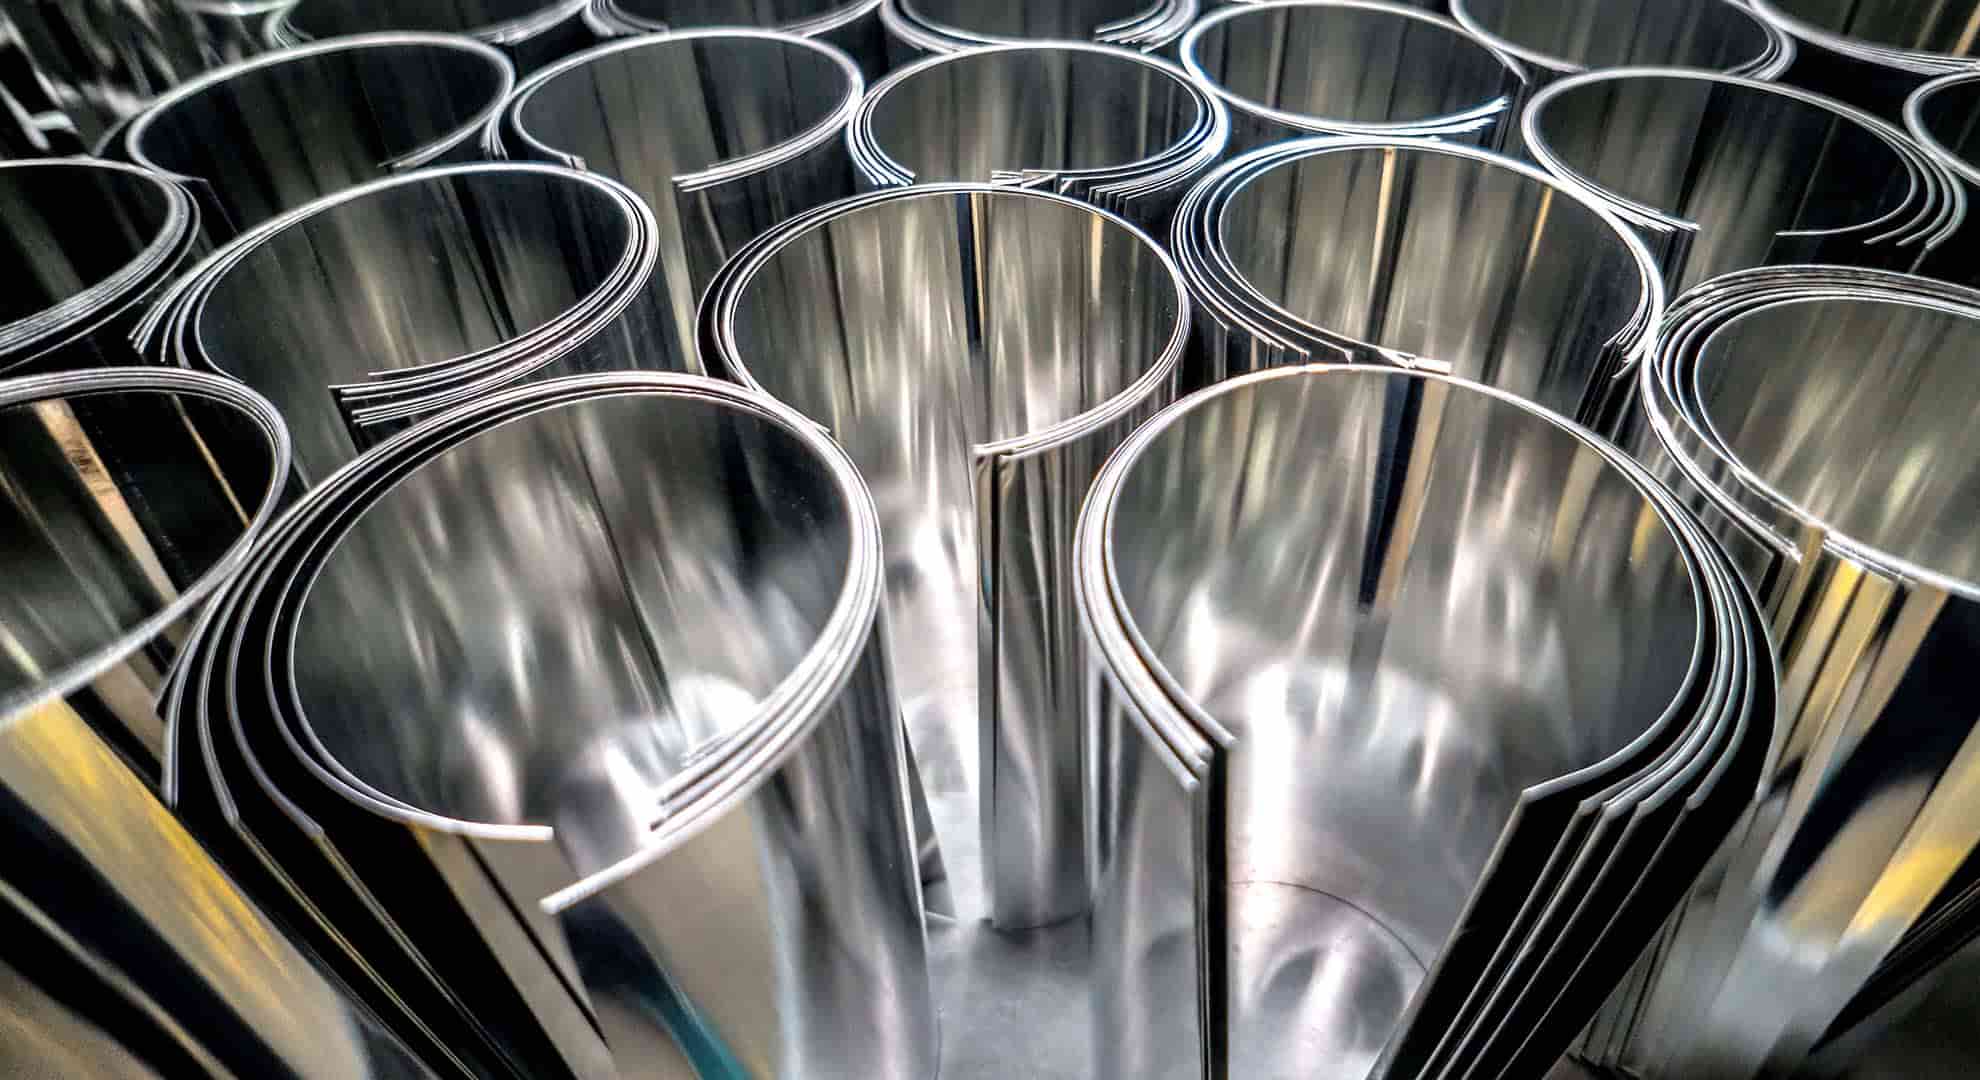 Rows of metal ready to be used in a manufacturing process